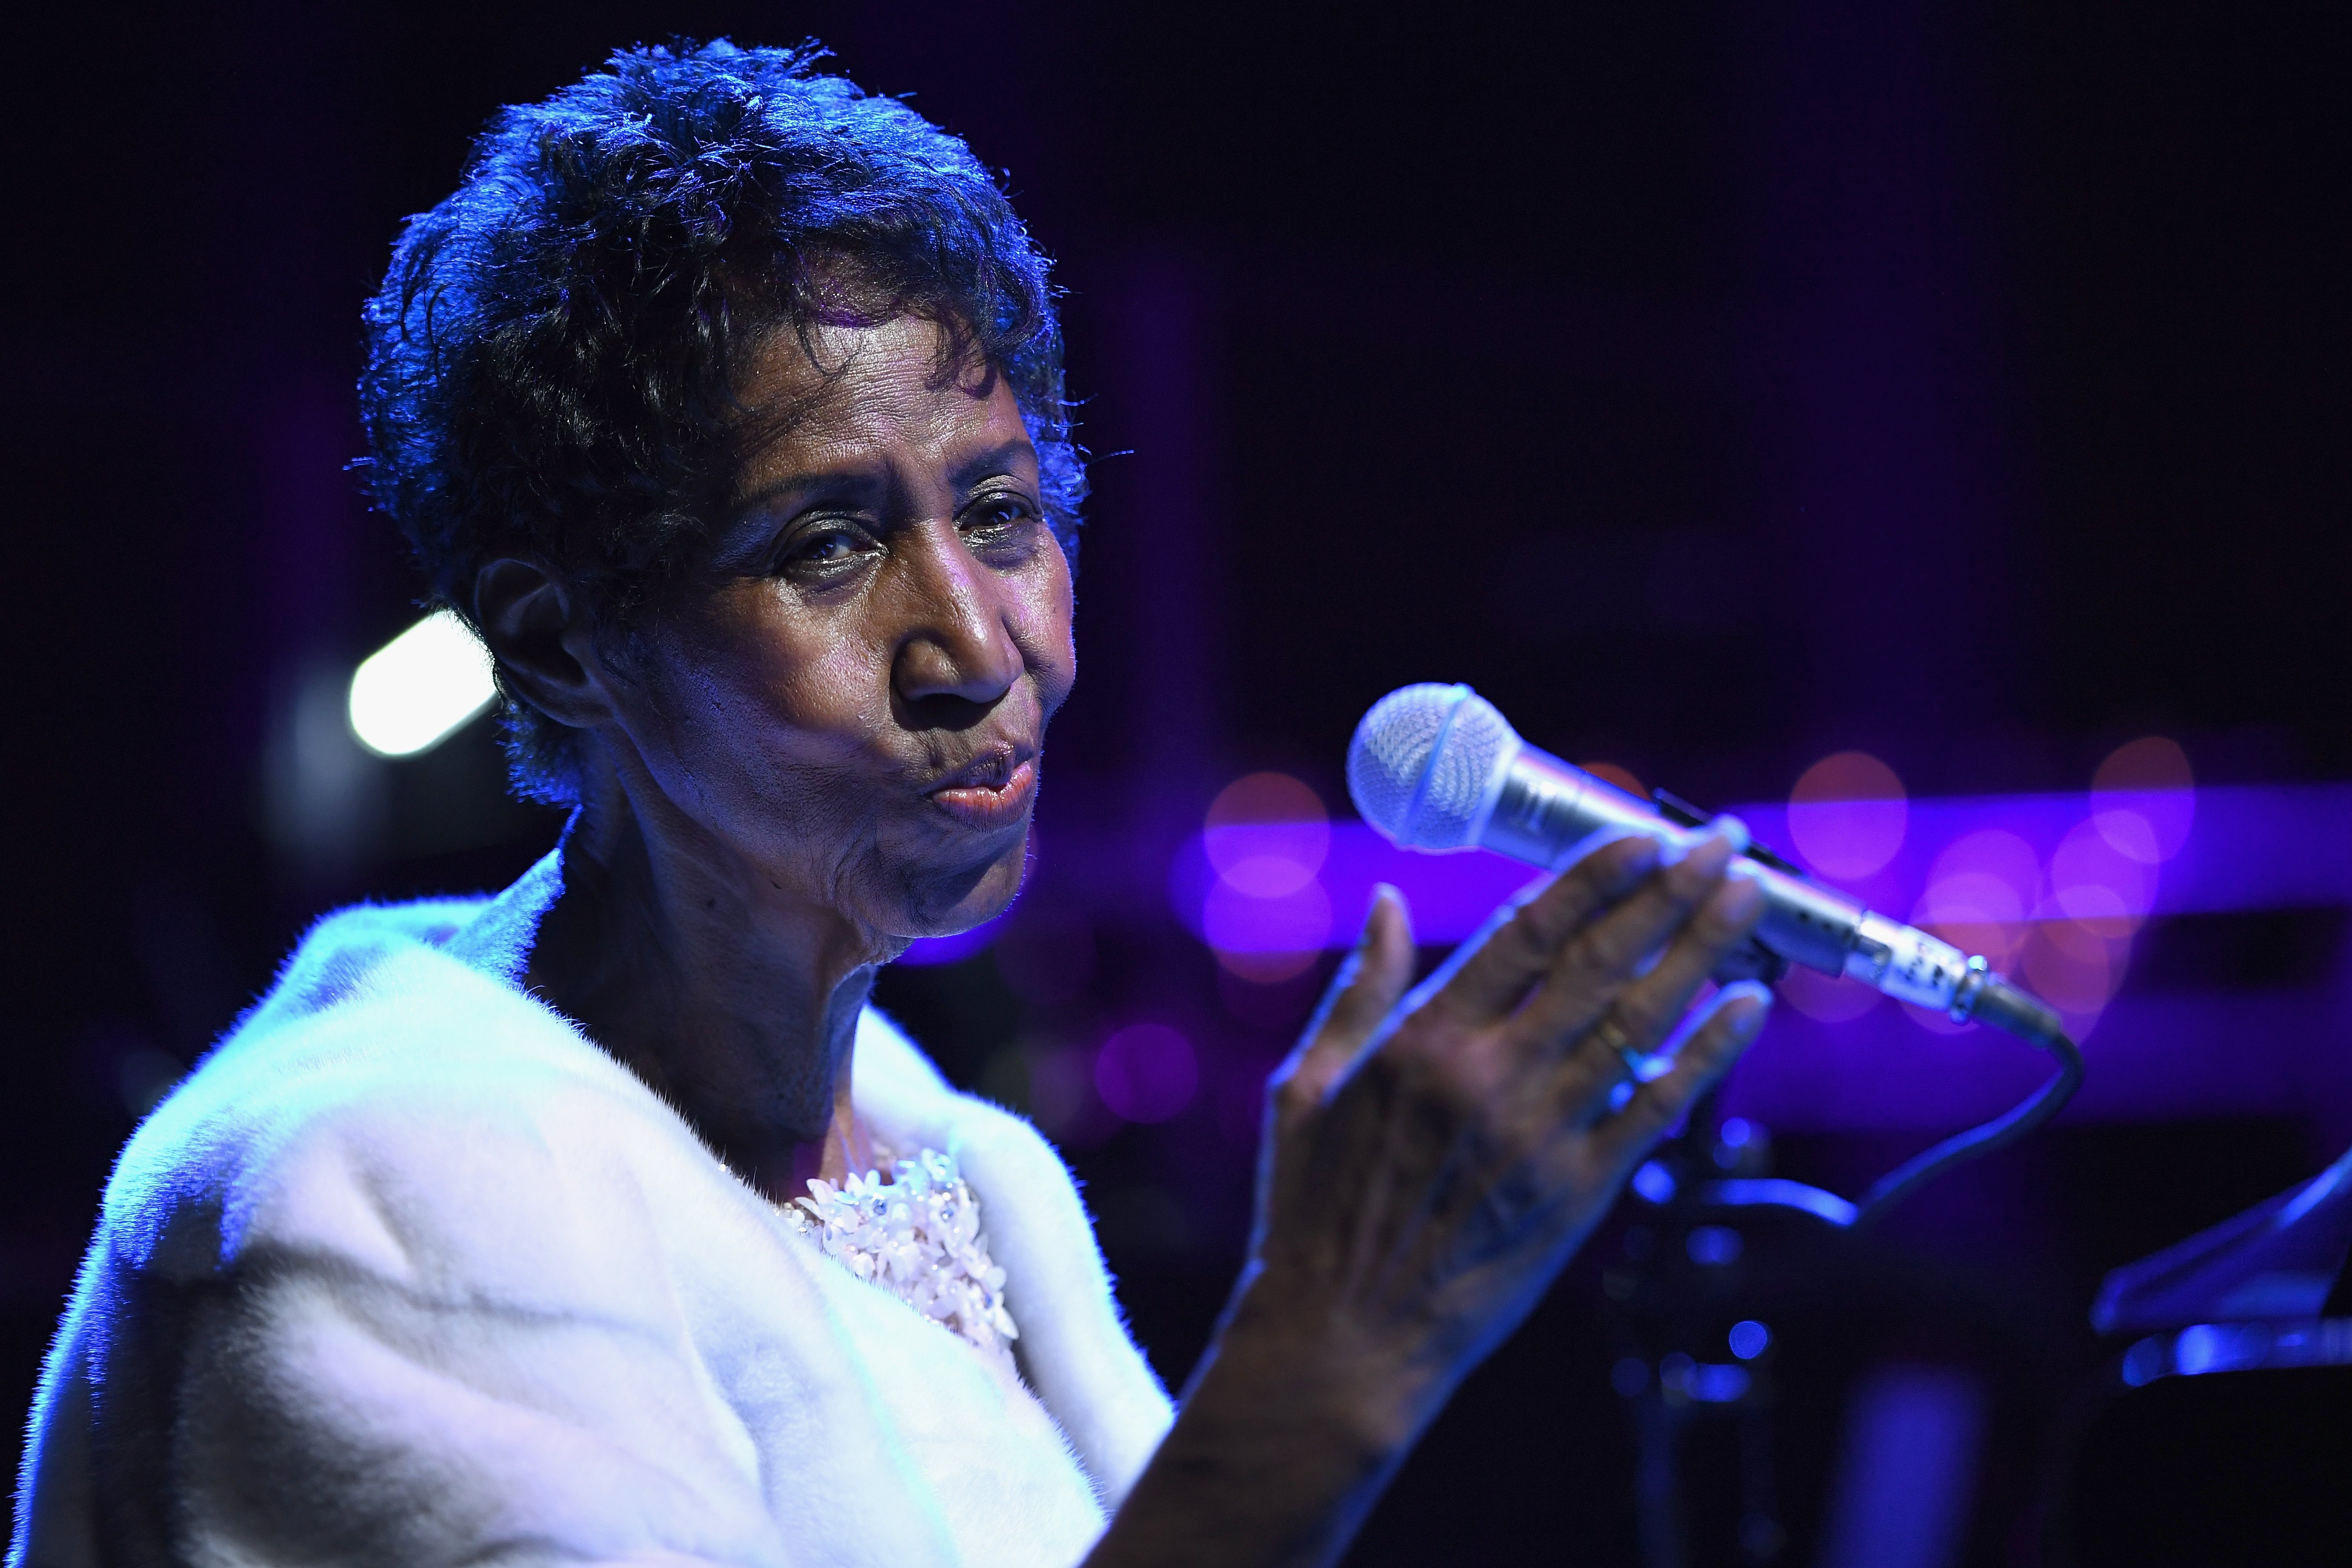 Aretha Franklin performing on stage at the Elton John AIDS Foundation's 25th year commemoration in New York on November 7, 2017. | Source: Getty Images